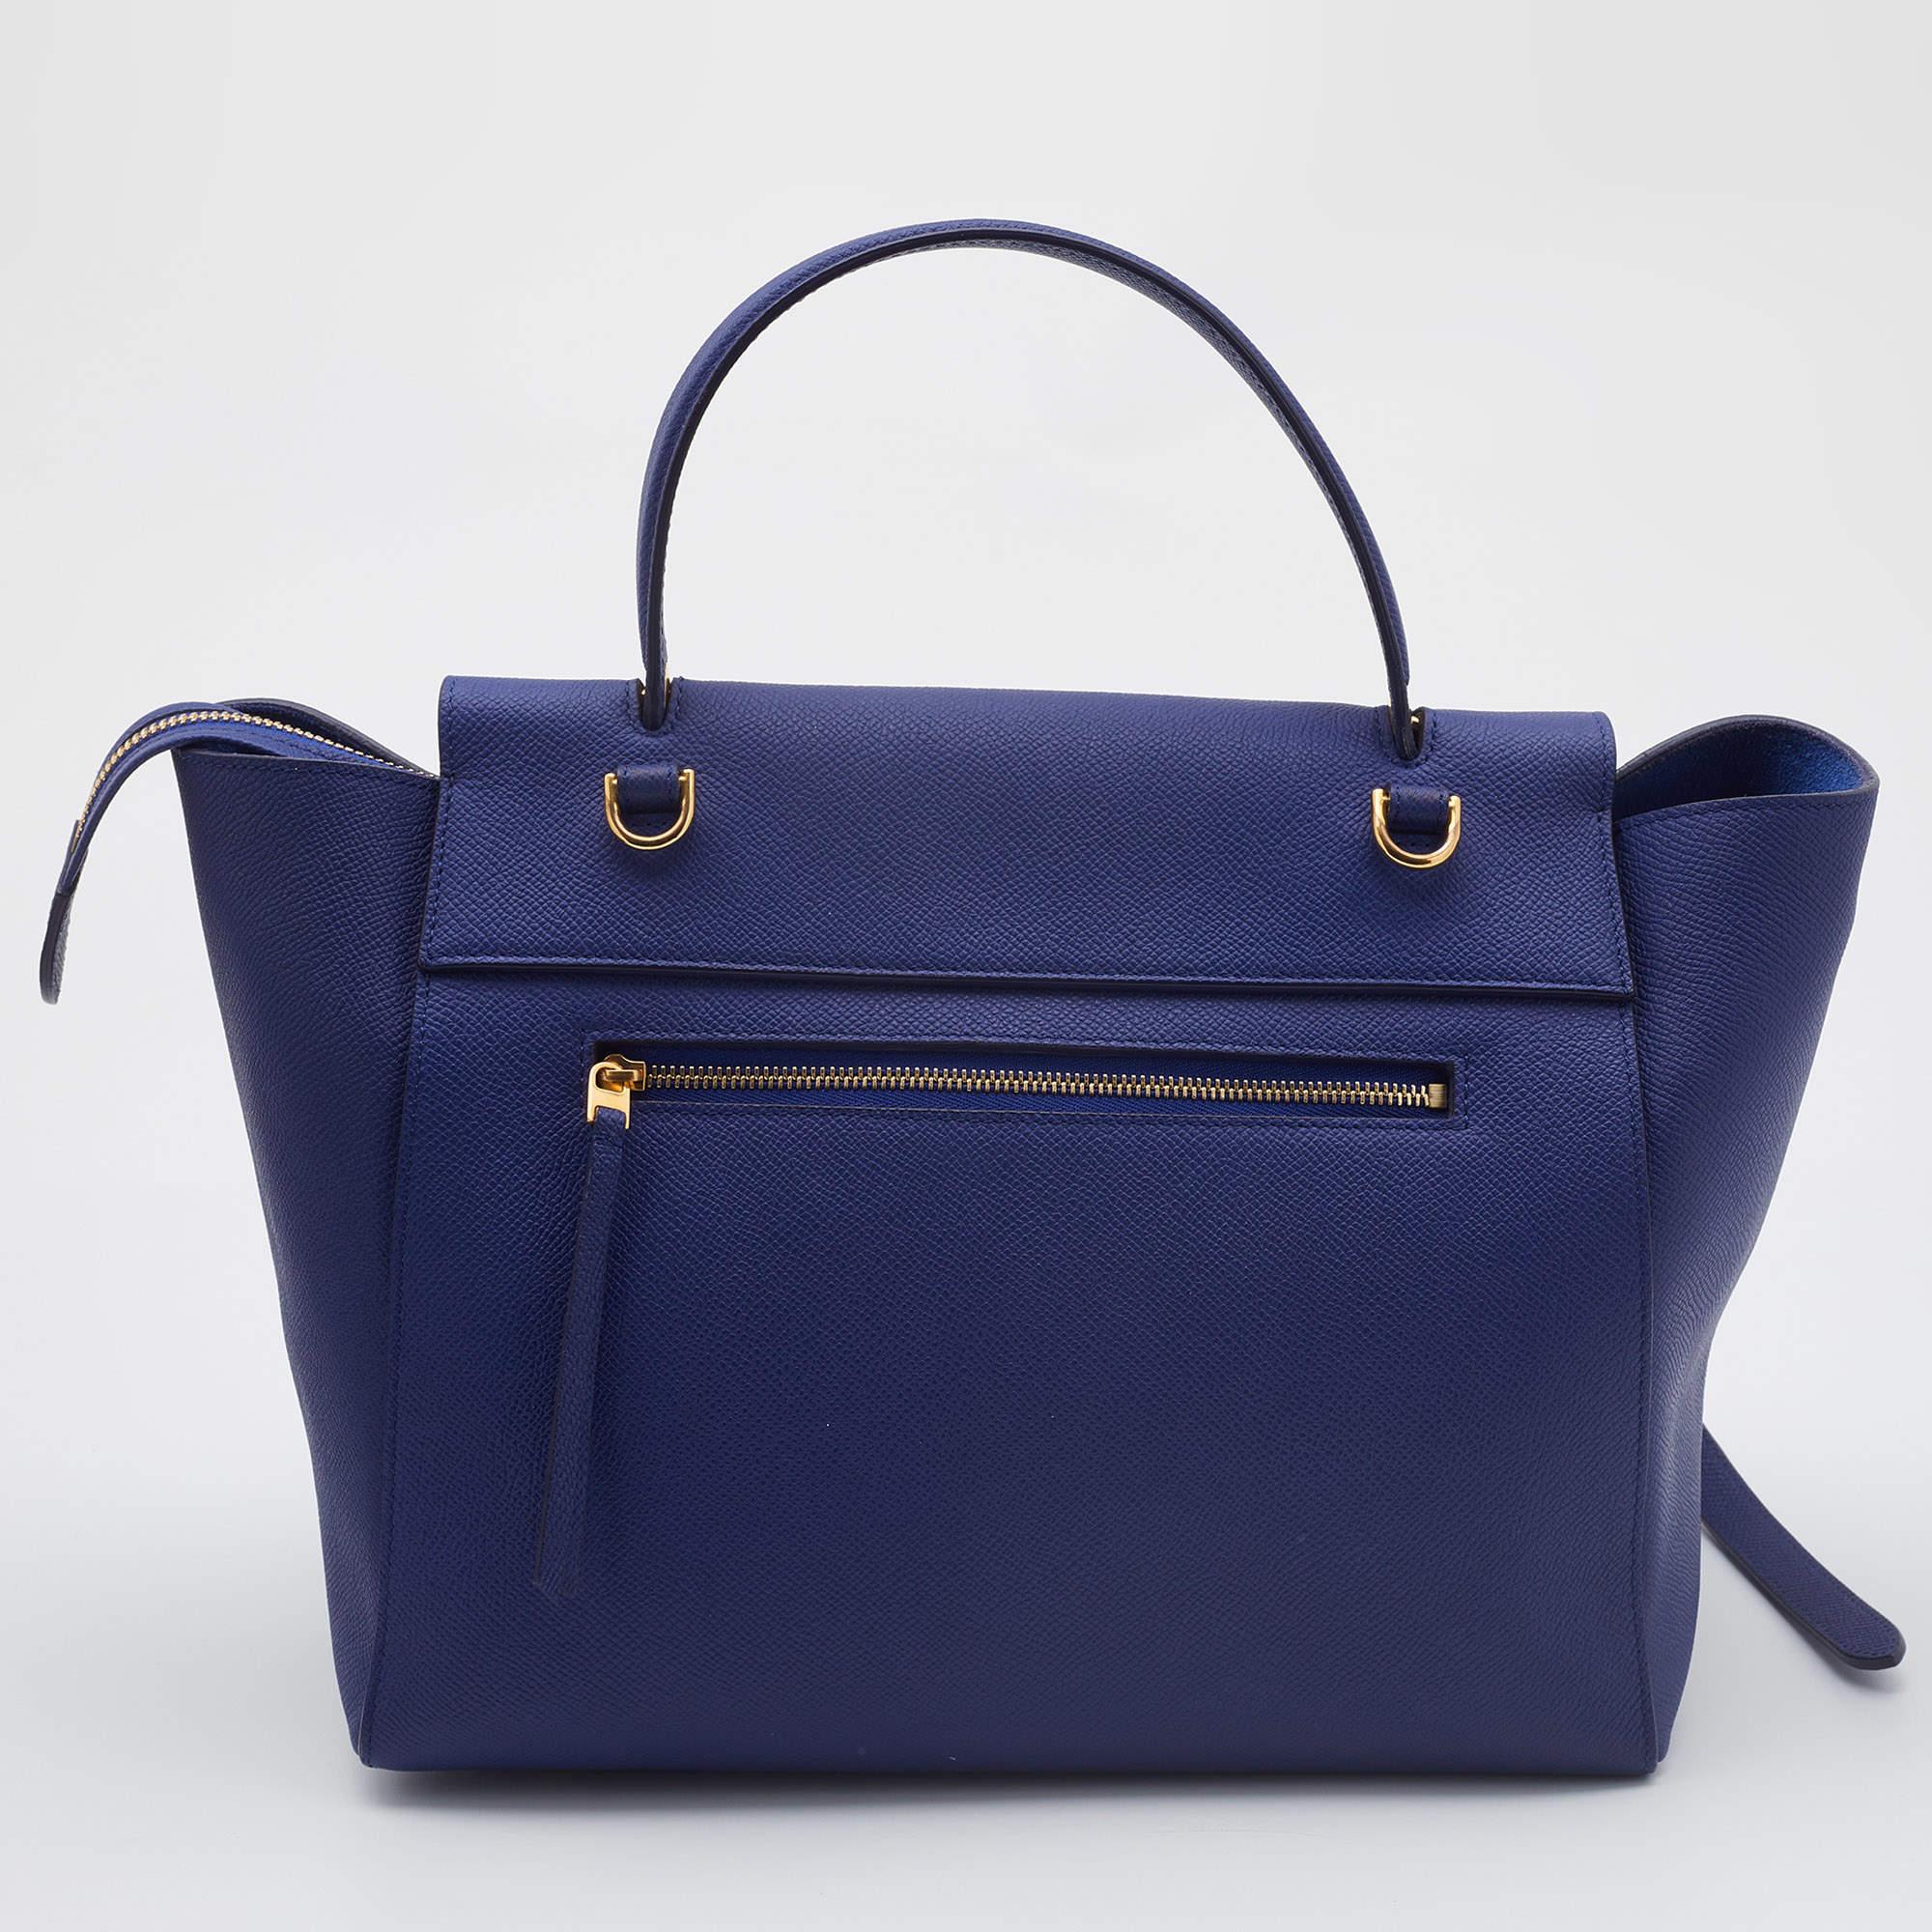 This bag from the house of Celine is an accessory you would go to season after season. It has been crafted from navy blue leather into a flap style. It comes with a top handle, an optional strap, and a well-lined interior.

Includes: Original